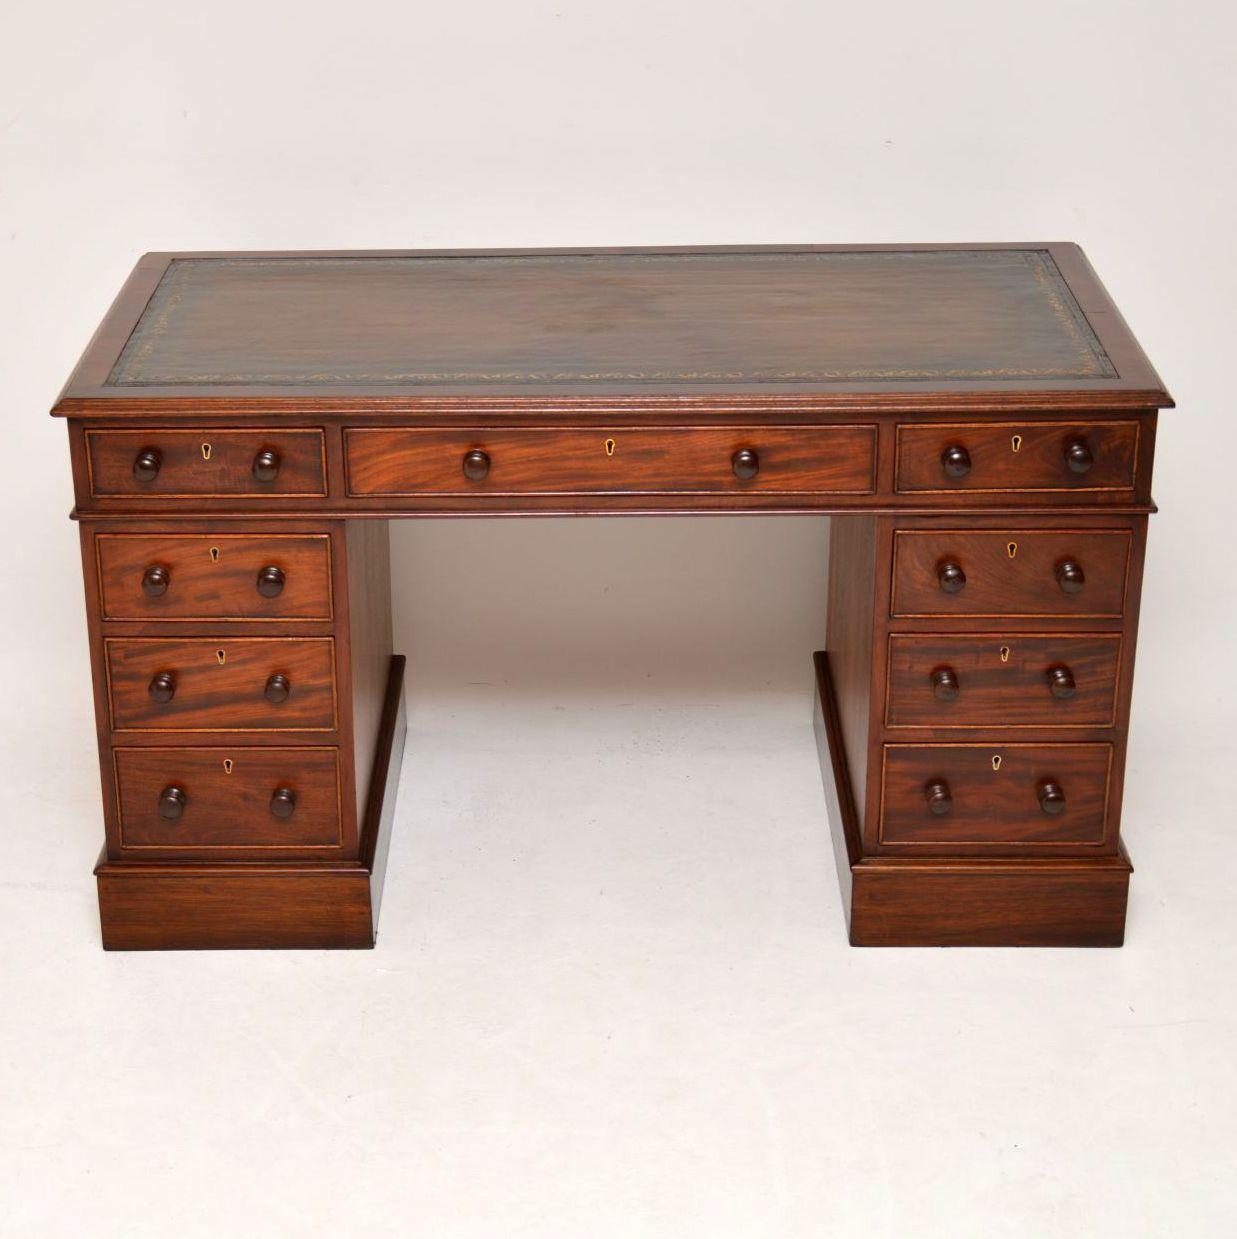 High quality antique Victorian mahogany pedestal desk in excellent condition and dating to circa 1860s period. It has a rich mahogany color and the leather writing surface is hand coloured with a tooled edge. All the drawers are graduated in depth